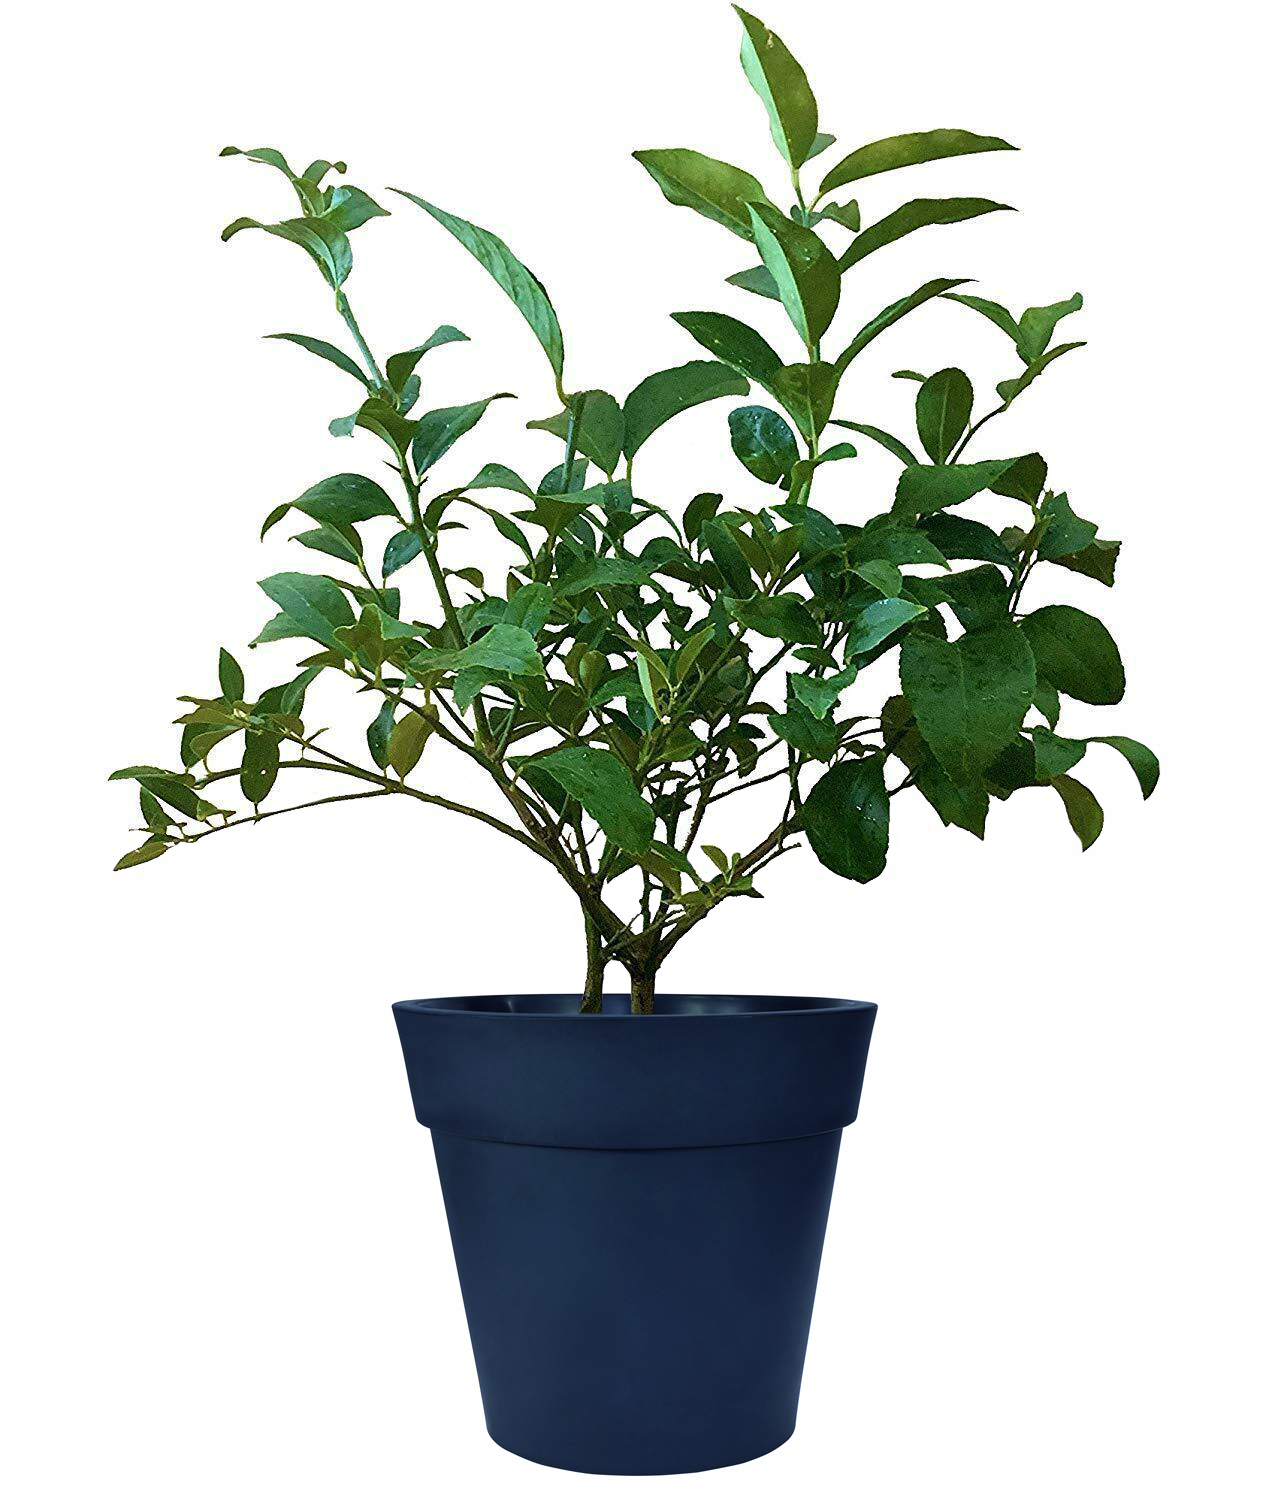 Image of Cocktail Tree - (2 in 1 Meyer Lemon / Persian Lime Tree) (Age: 1 Year Height: 12 - 16 IN Ship Method: Delivery)